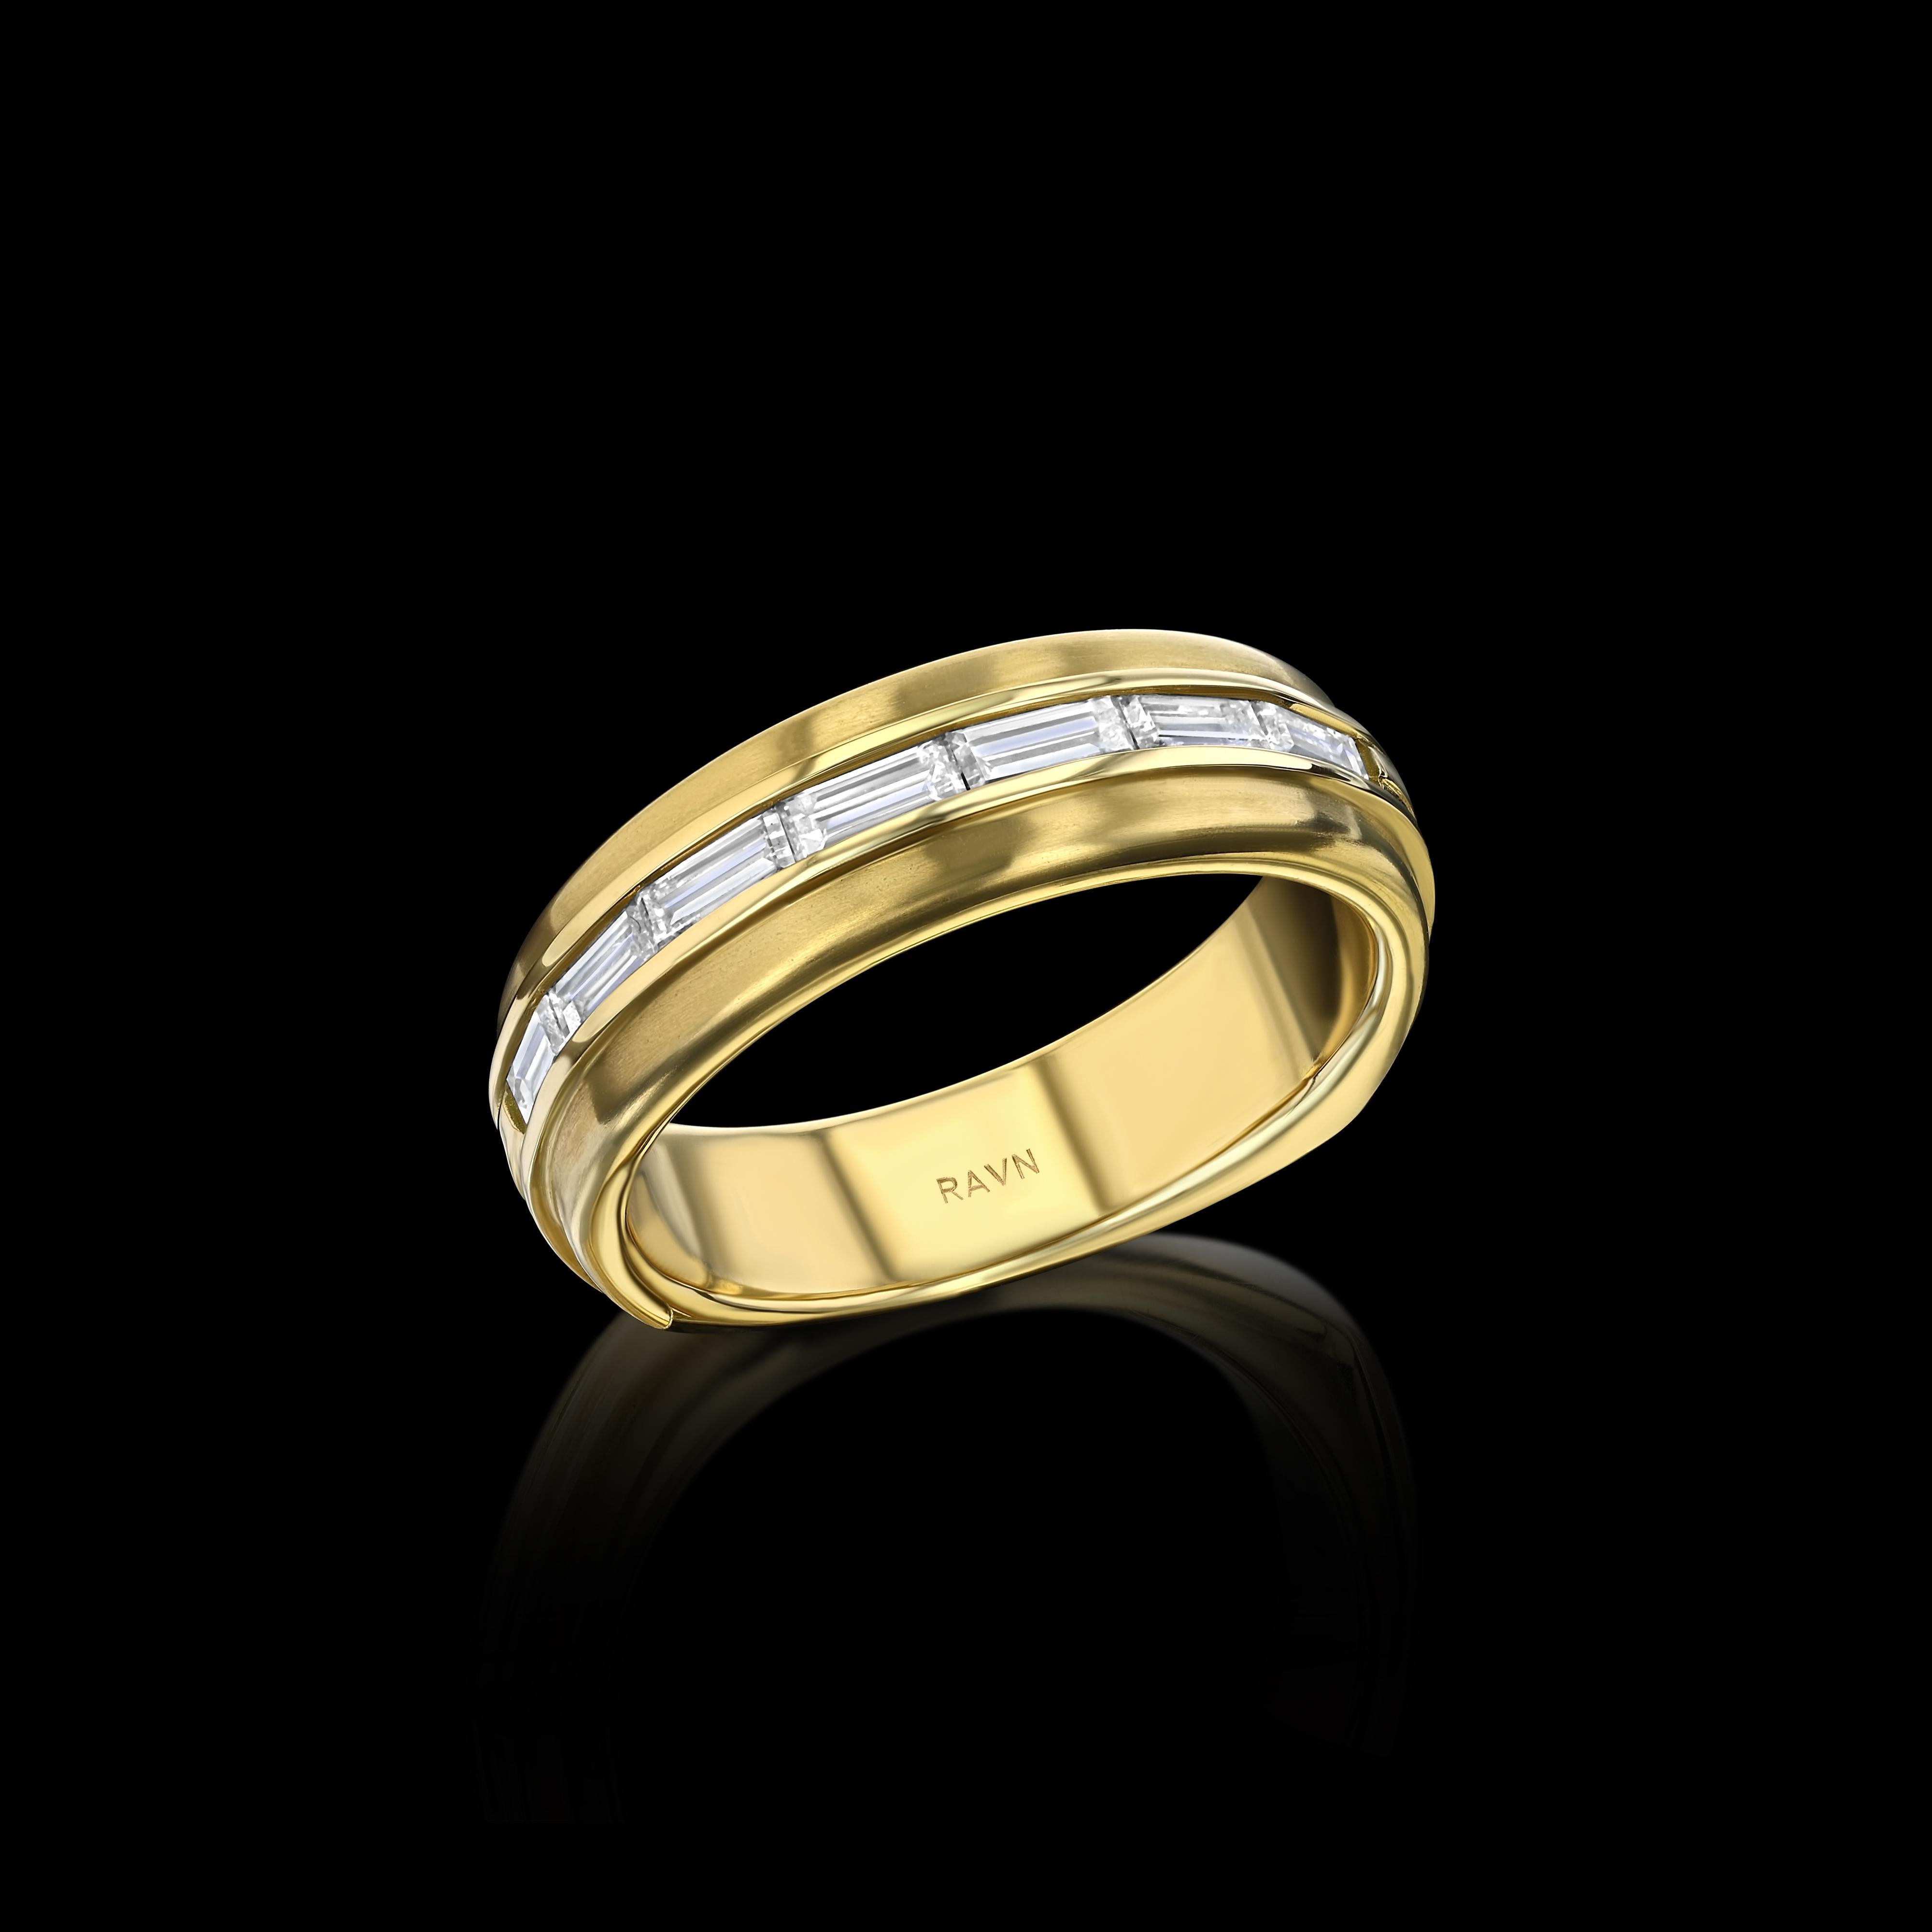 For Sale:  House of RAVN, 18k Yellow Gold, Men's Euro Band, with 7 Baguette Diamonds 4